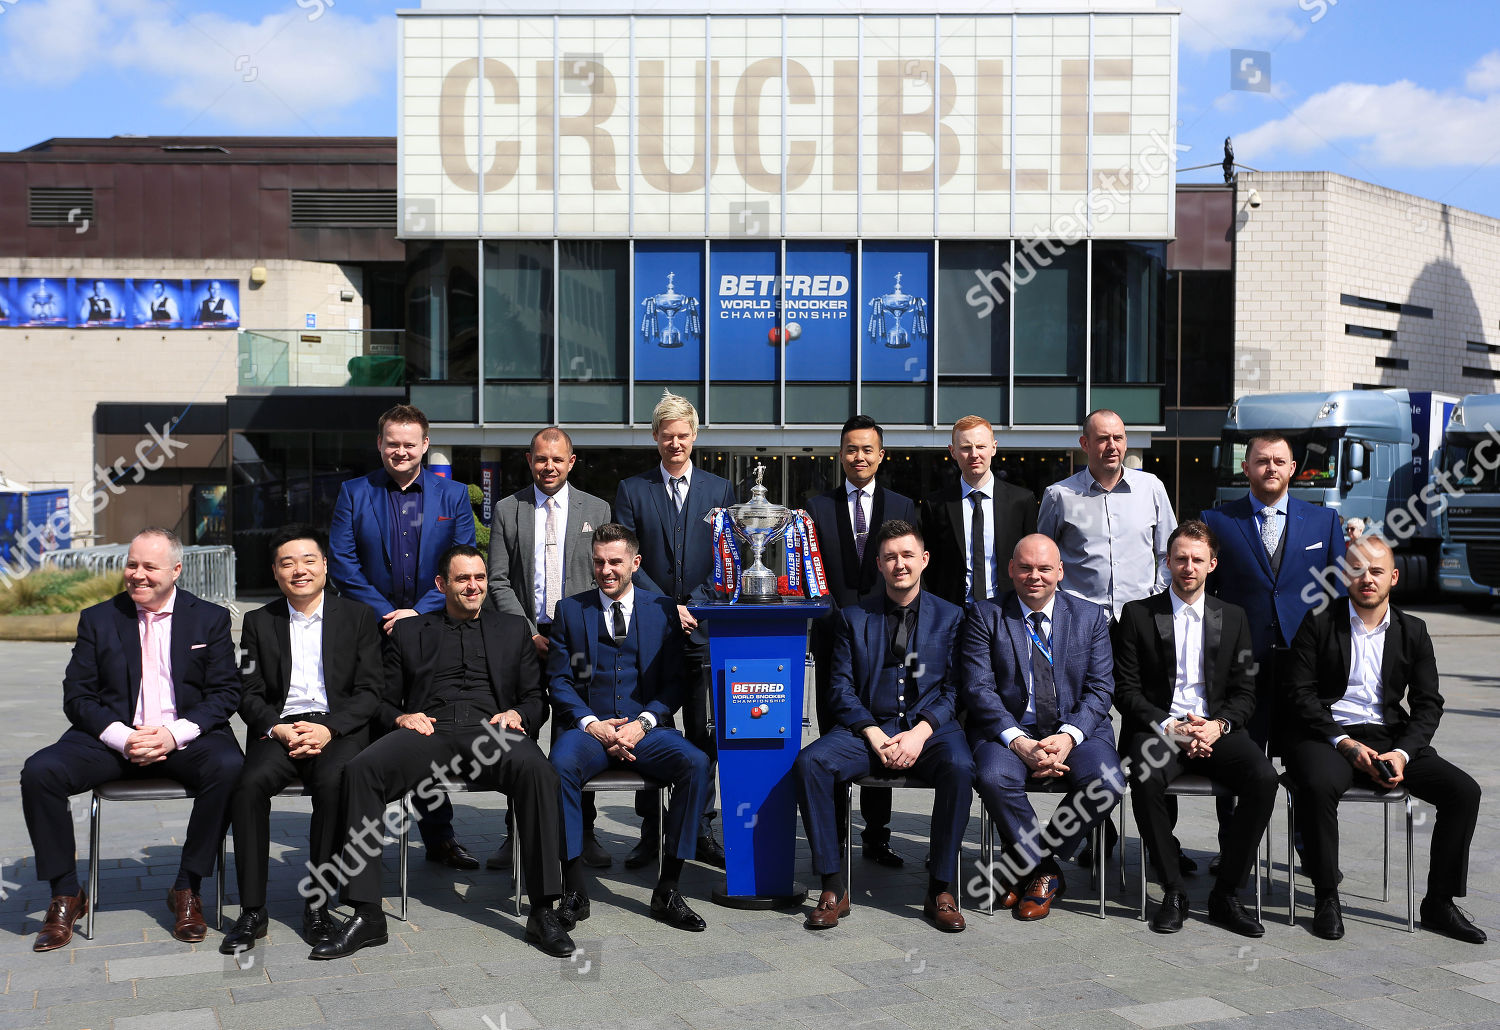 Group Photograph Top 16 Snooker Players Editorial Stock Photo - Image | Shutterstock